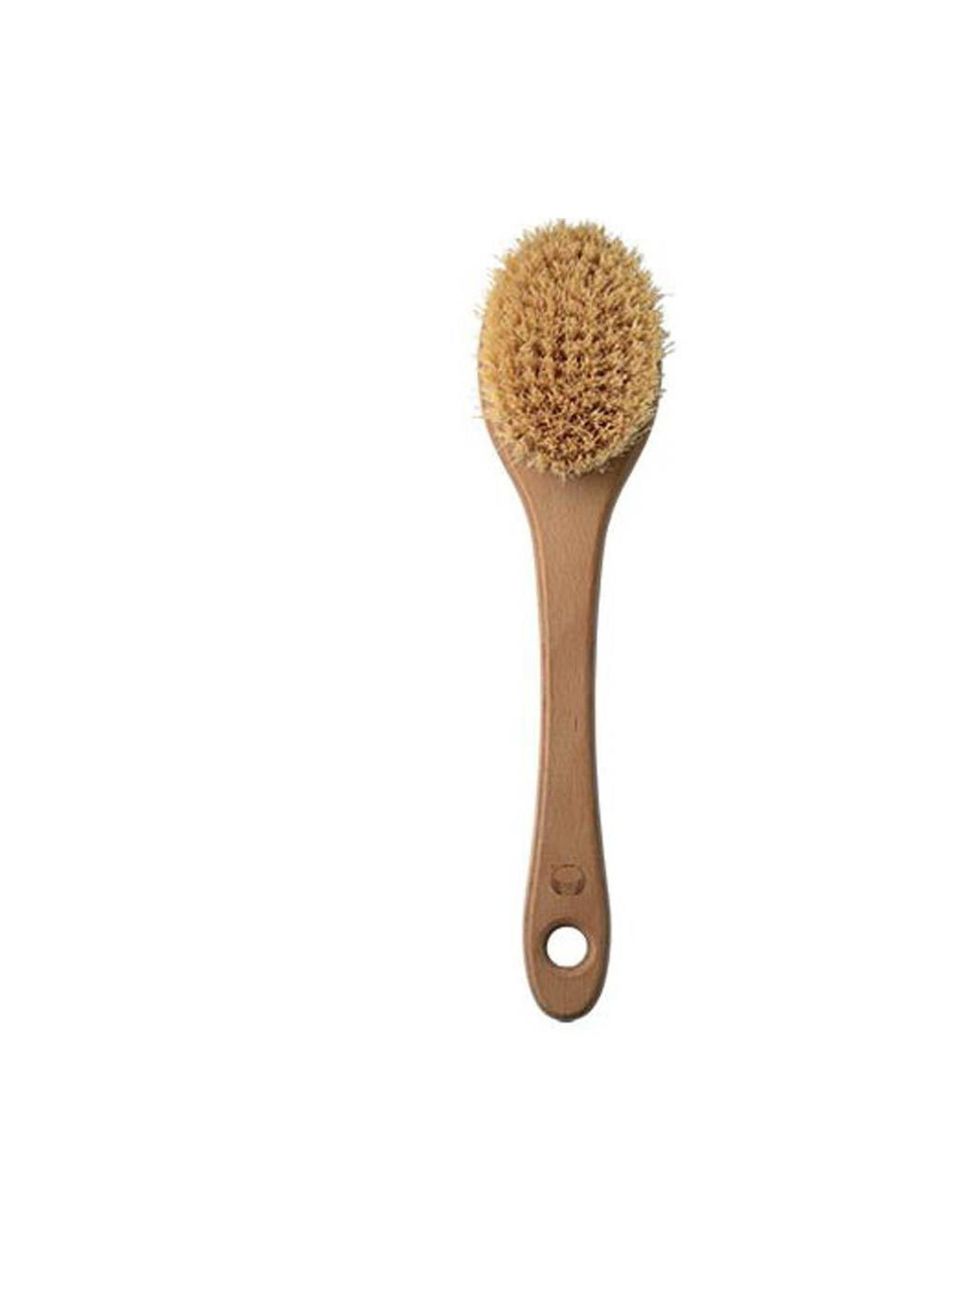 <p><a href="http://www.thebodyshop.co.uk/bath-body-care/accessories/long-handled-cactus-bath-brush.aspx"></a></p><p>Clare Neill is the go-to expert for detoxing tips; I swear by dry-skin body brushing to get your lymphatic system going. Its crucial as i